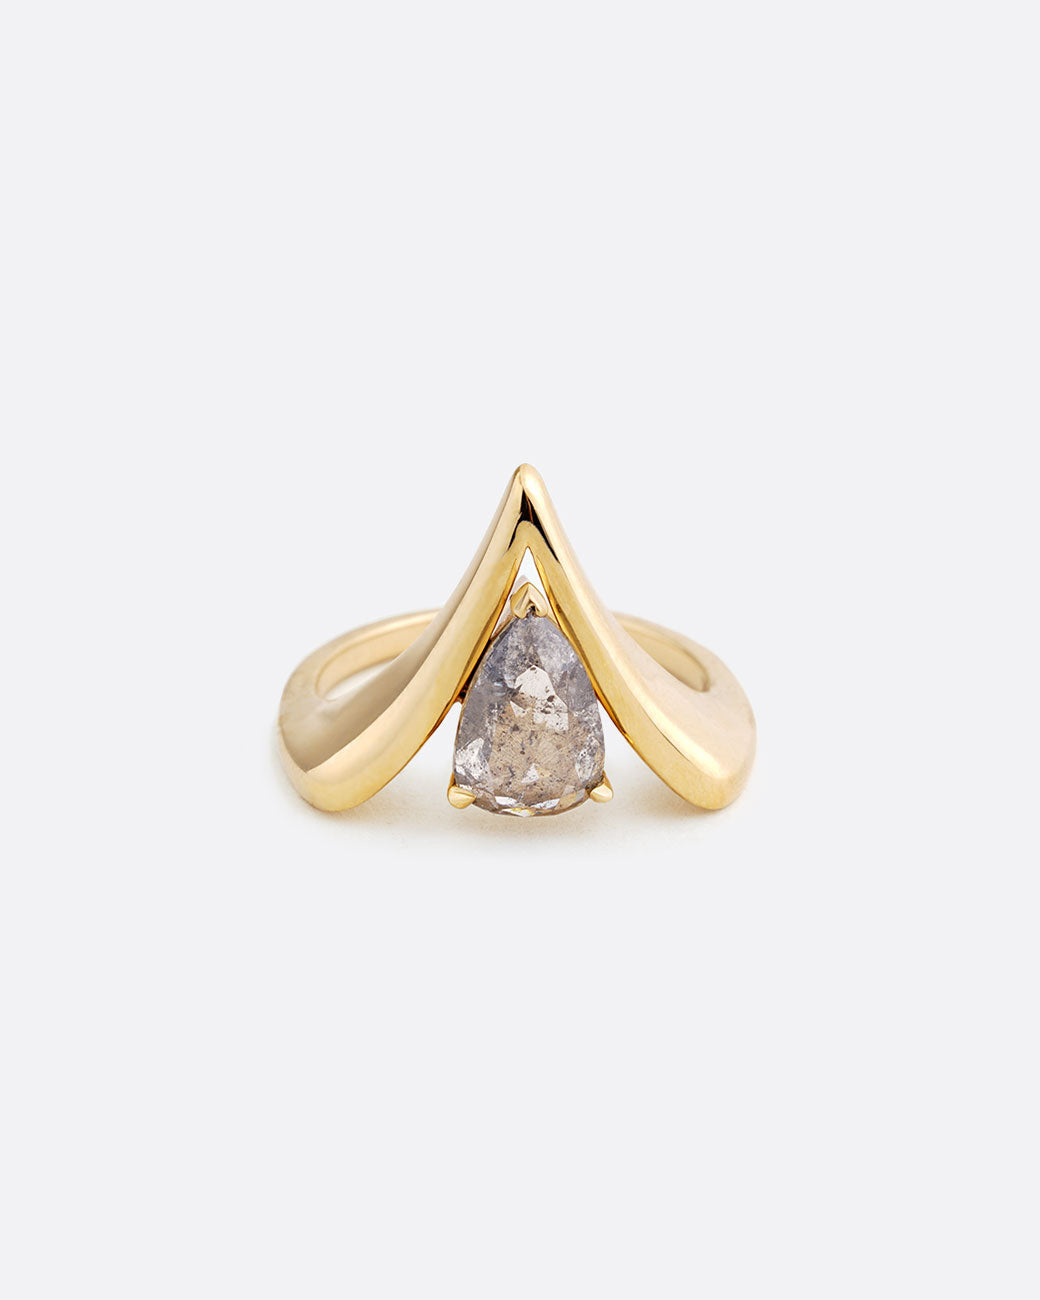 14k yellow gold V shaped ring with pear shaped salt and pepper diamond by Maggi Simpkins.